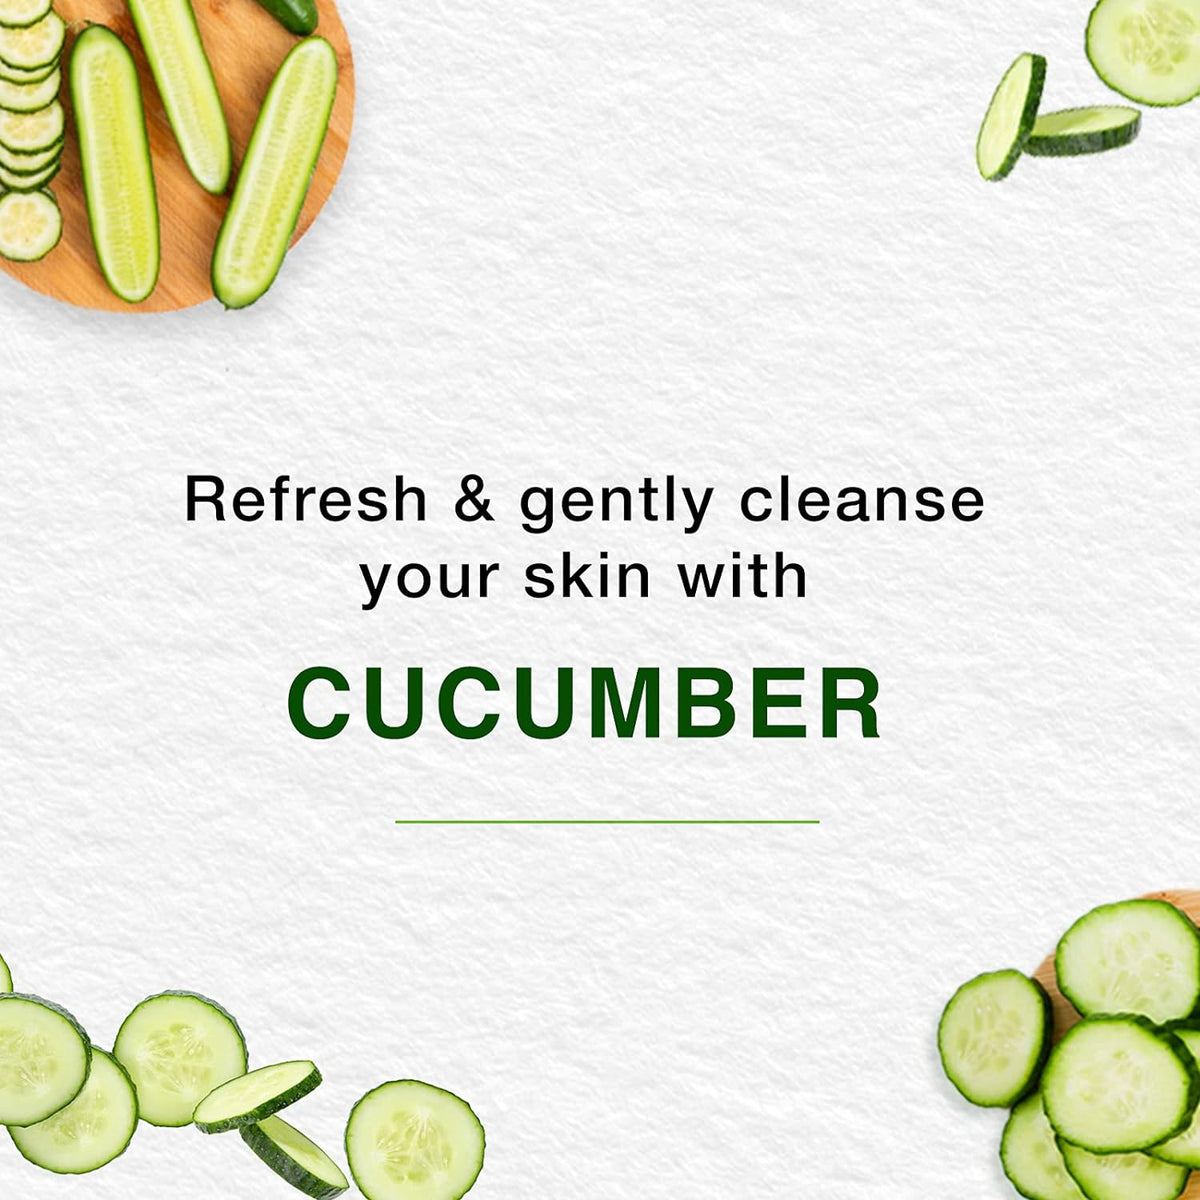 Himalaya Cucumber Refreshing Soap Refreshes & Soothes the Skin and Helps Reduce Excess Oil - 6x125gm